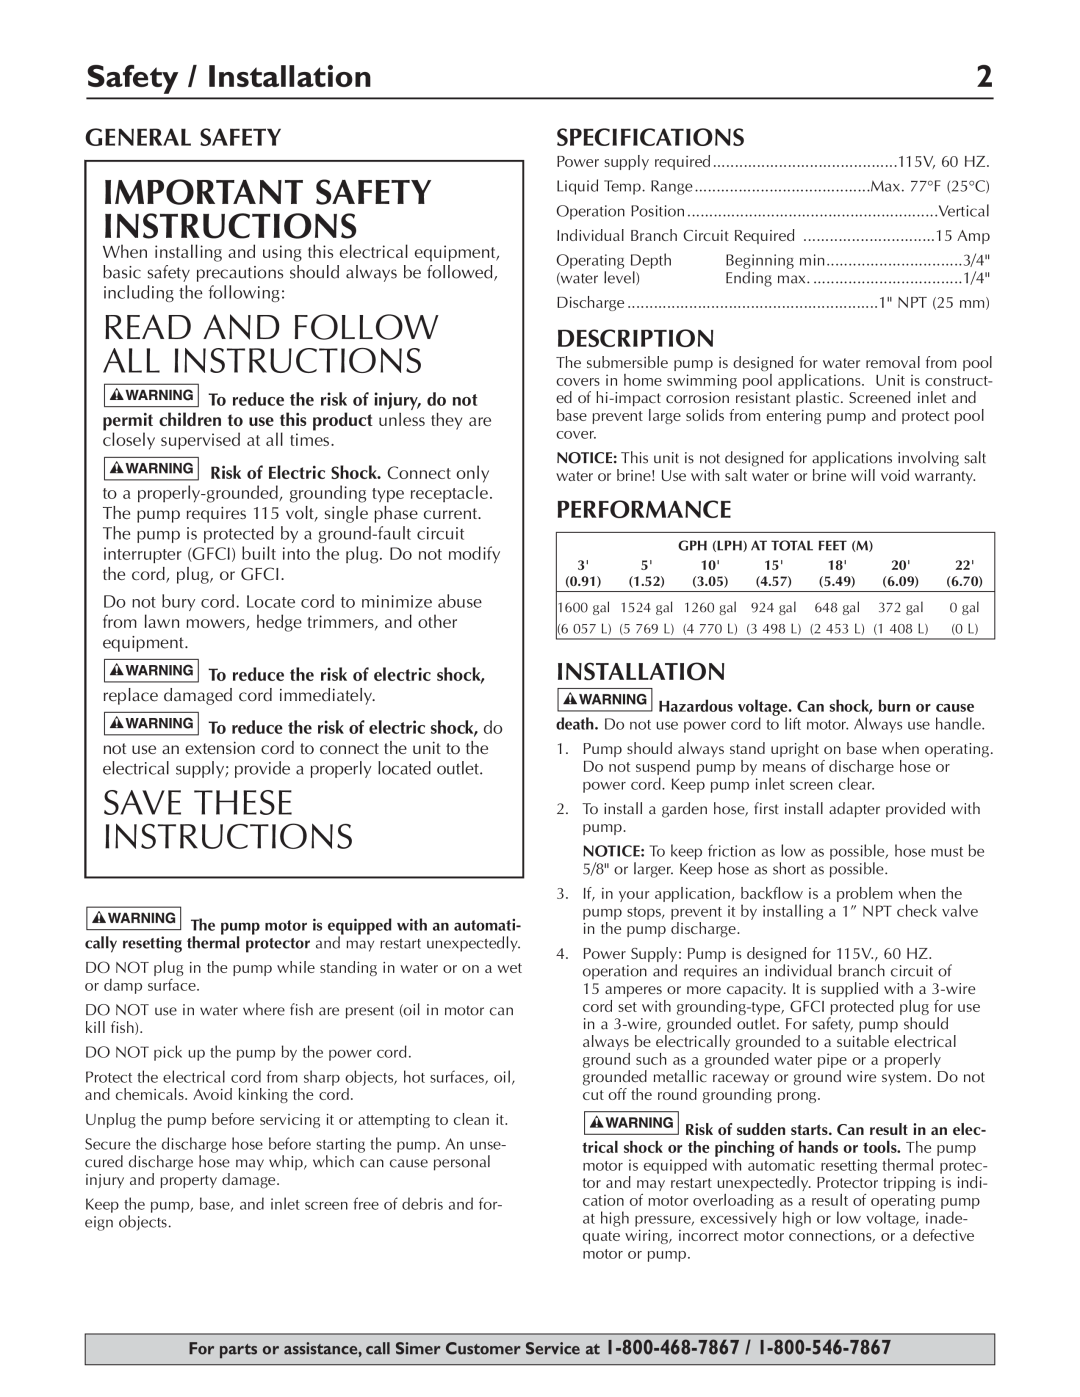 Simer Pumps 2115 Save These Instructions, Safety / Installation, General Safety, Specifications, Description, Performance 